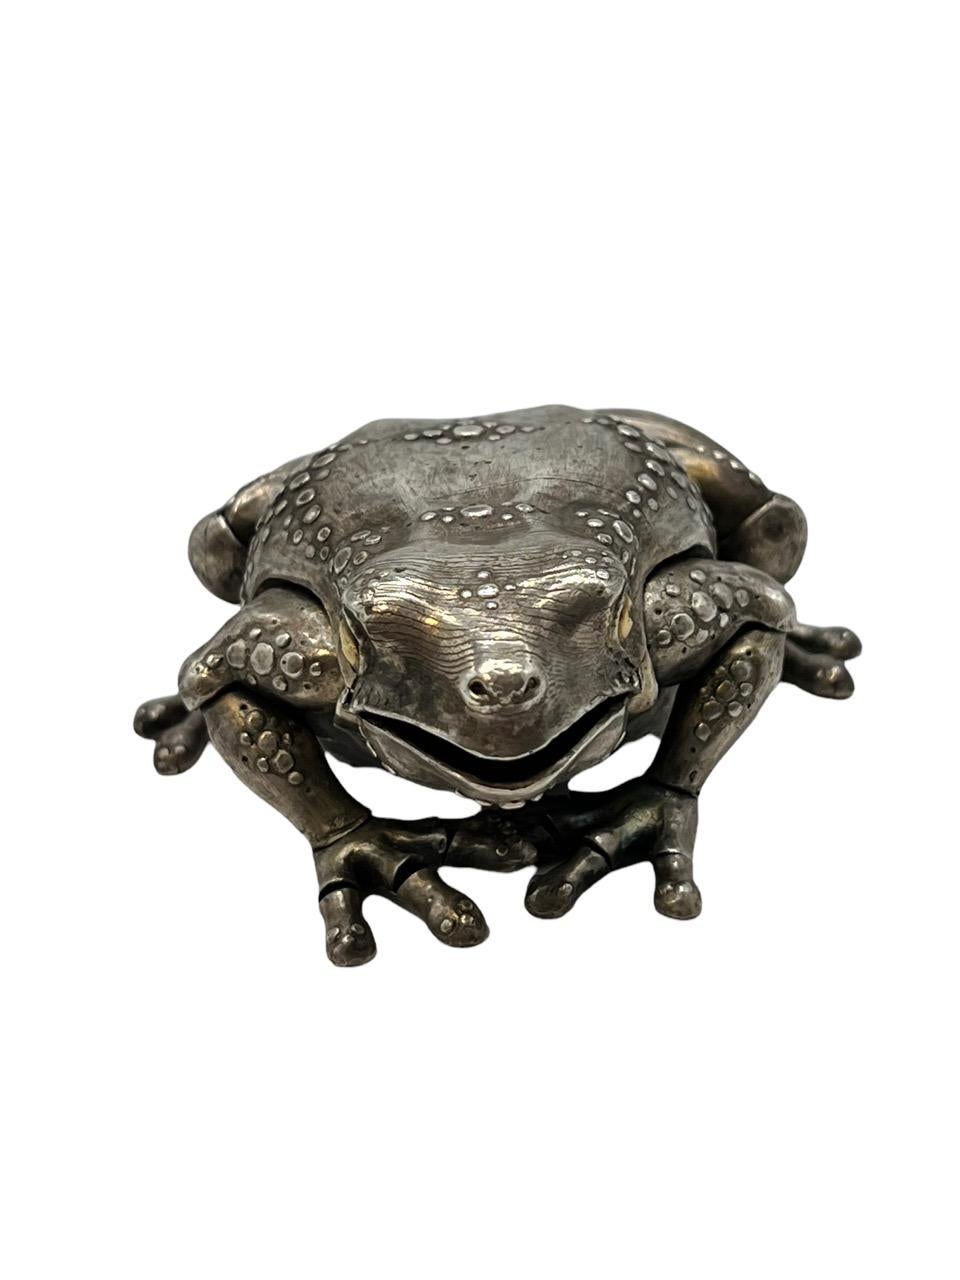 Oleg Konstantinov Fully Articulated Frog Made of Sterling Silver In Good Condition For Sale In North Miami, FL